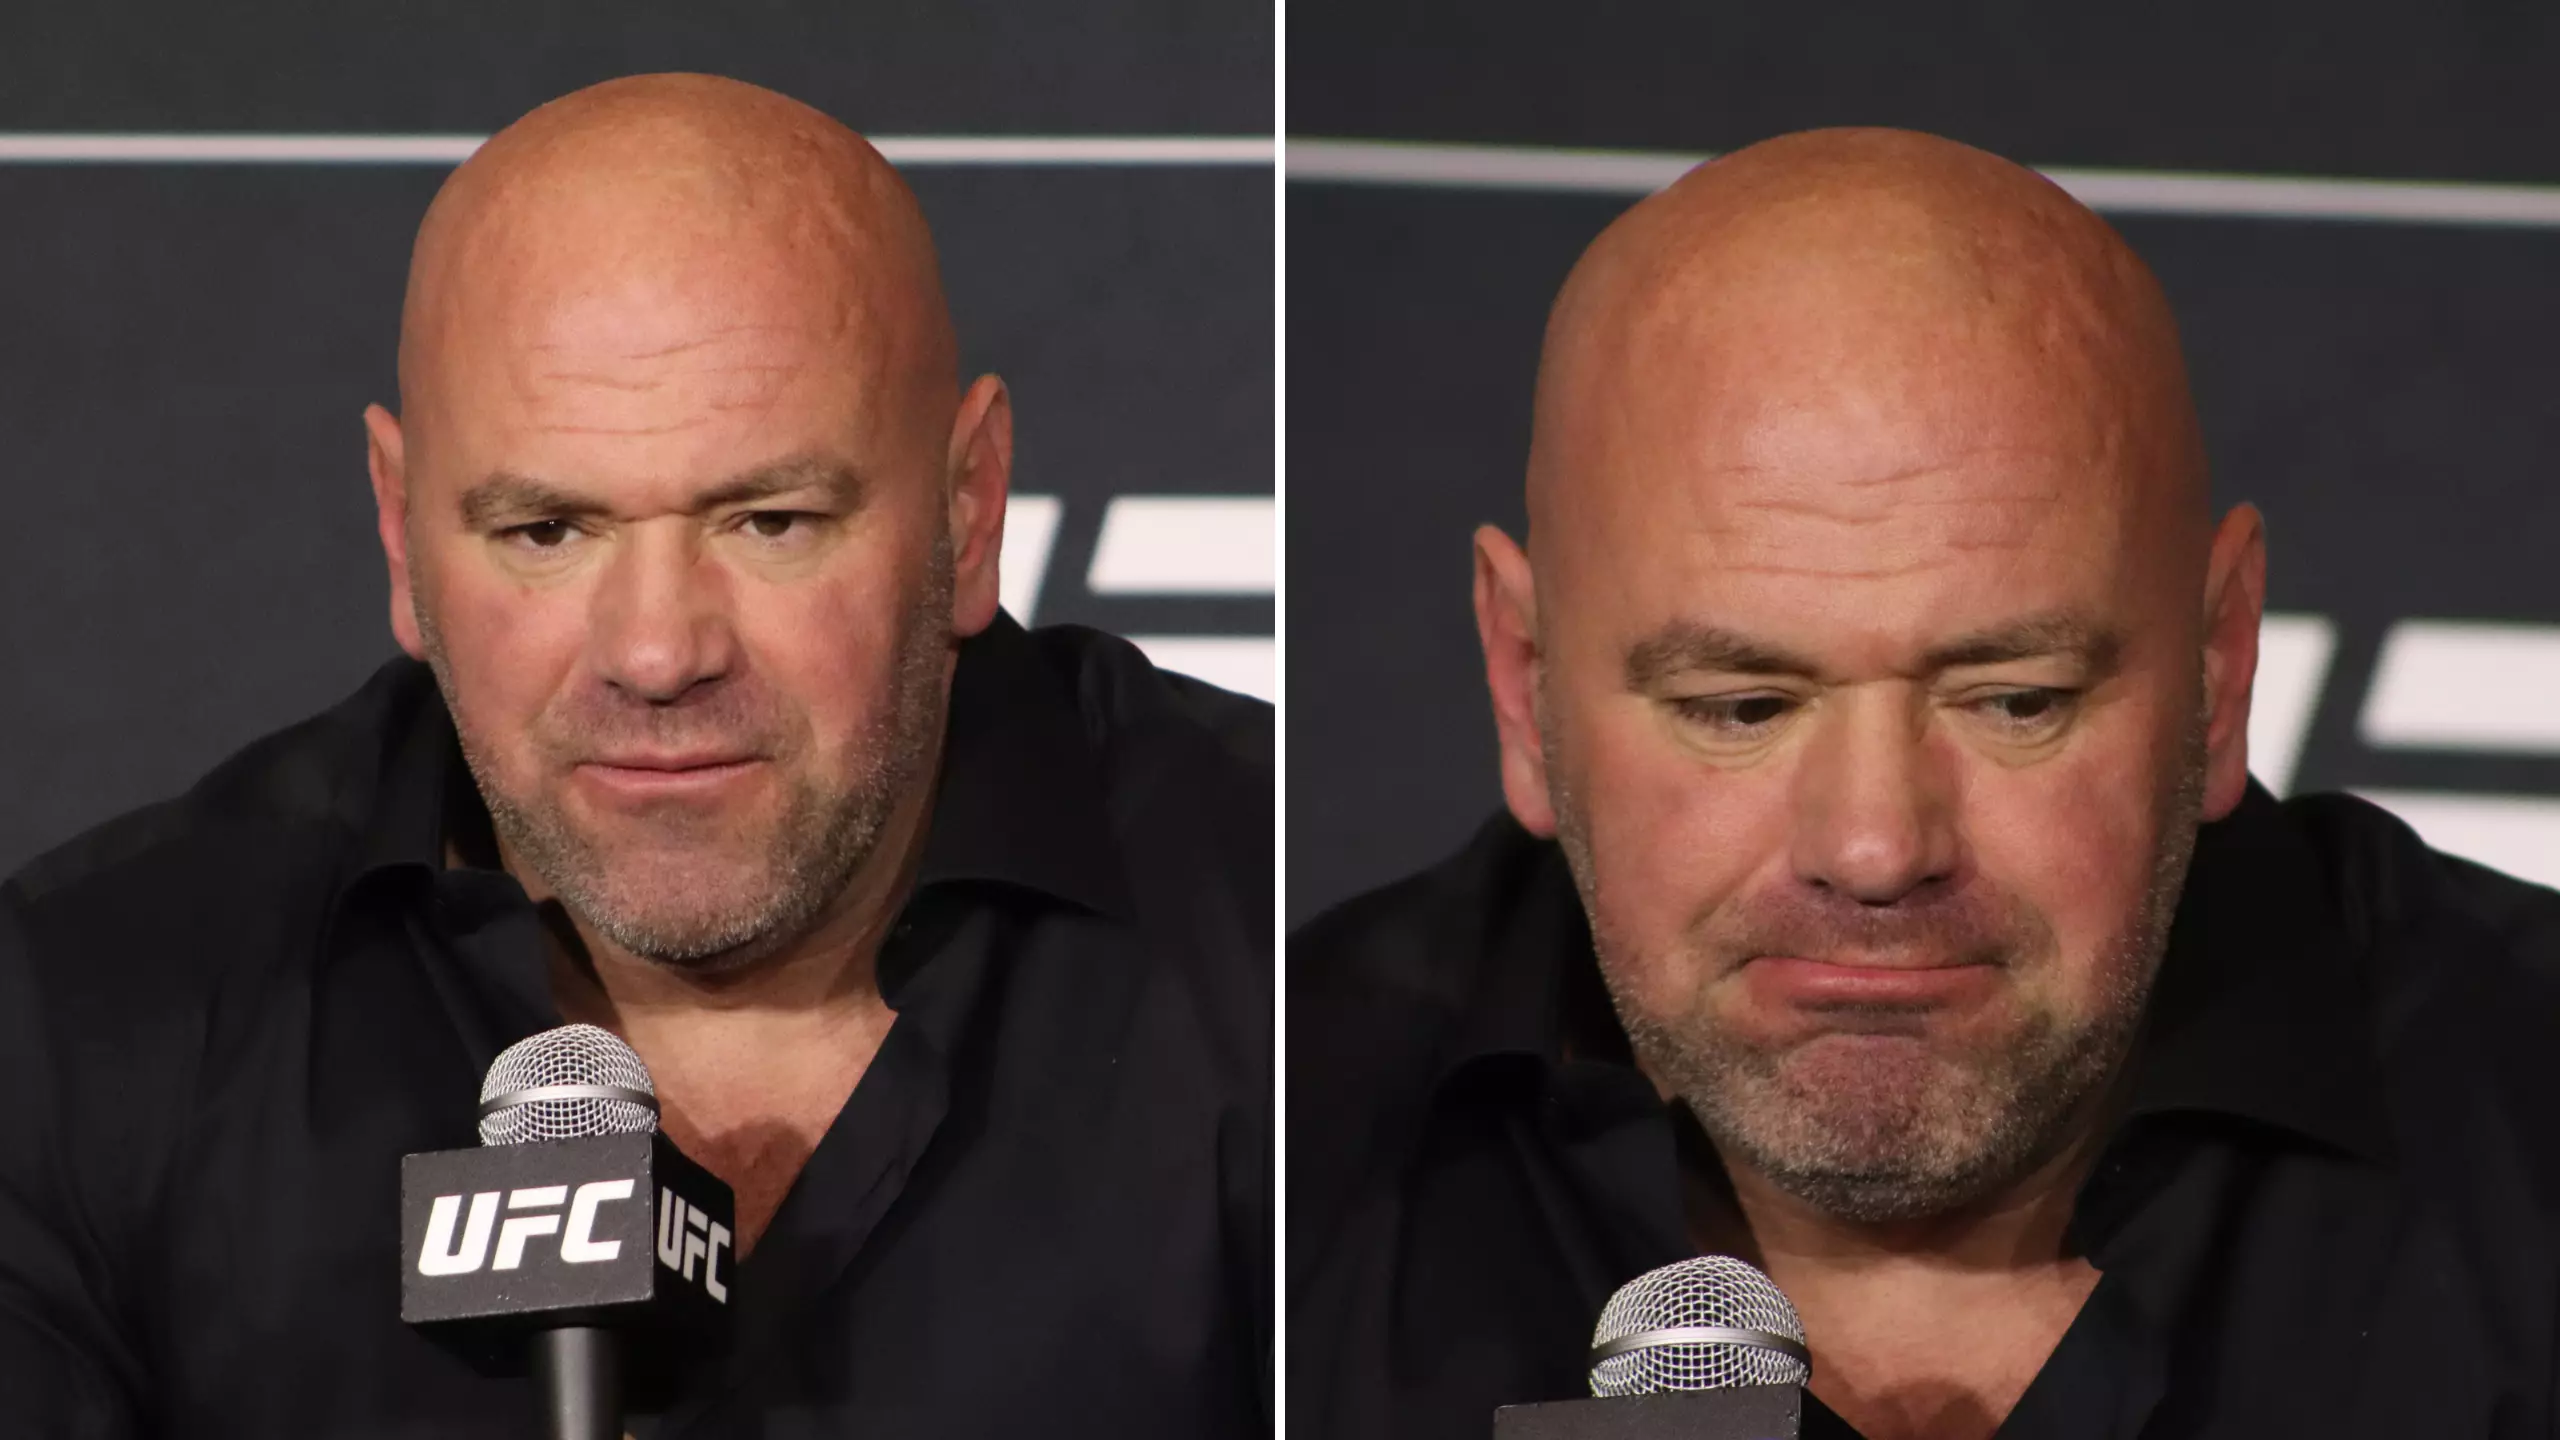 UFC Release Two Legends As Dana White's Brutal Cuts Continue